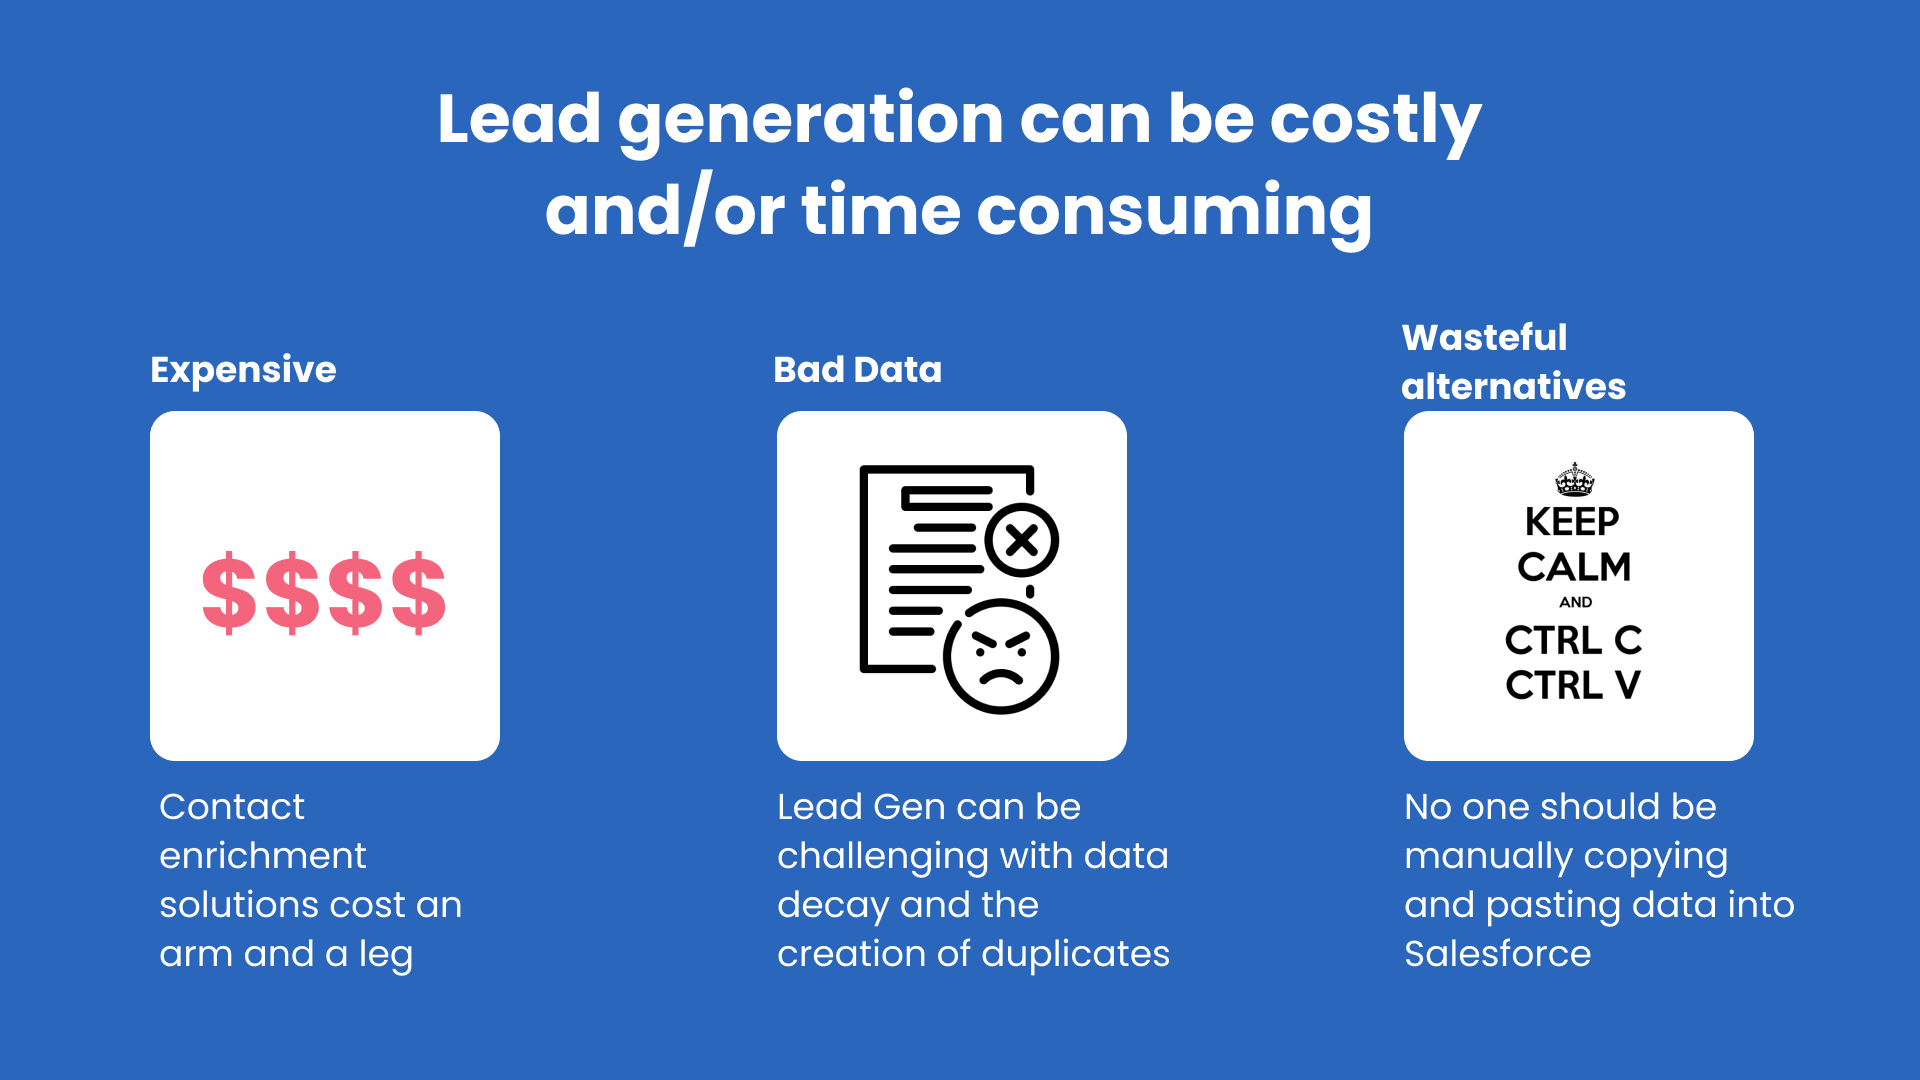 The challenges with lead generation are contact databases can be expensive, data decay can result in lead gen efforts to create duplicates and resources are often wasted when SalesOps have to rely on manual efforts to get the data into Salesforce.